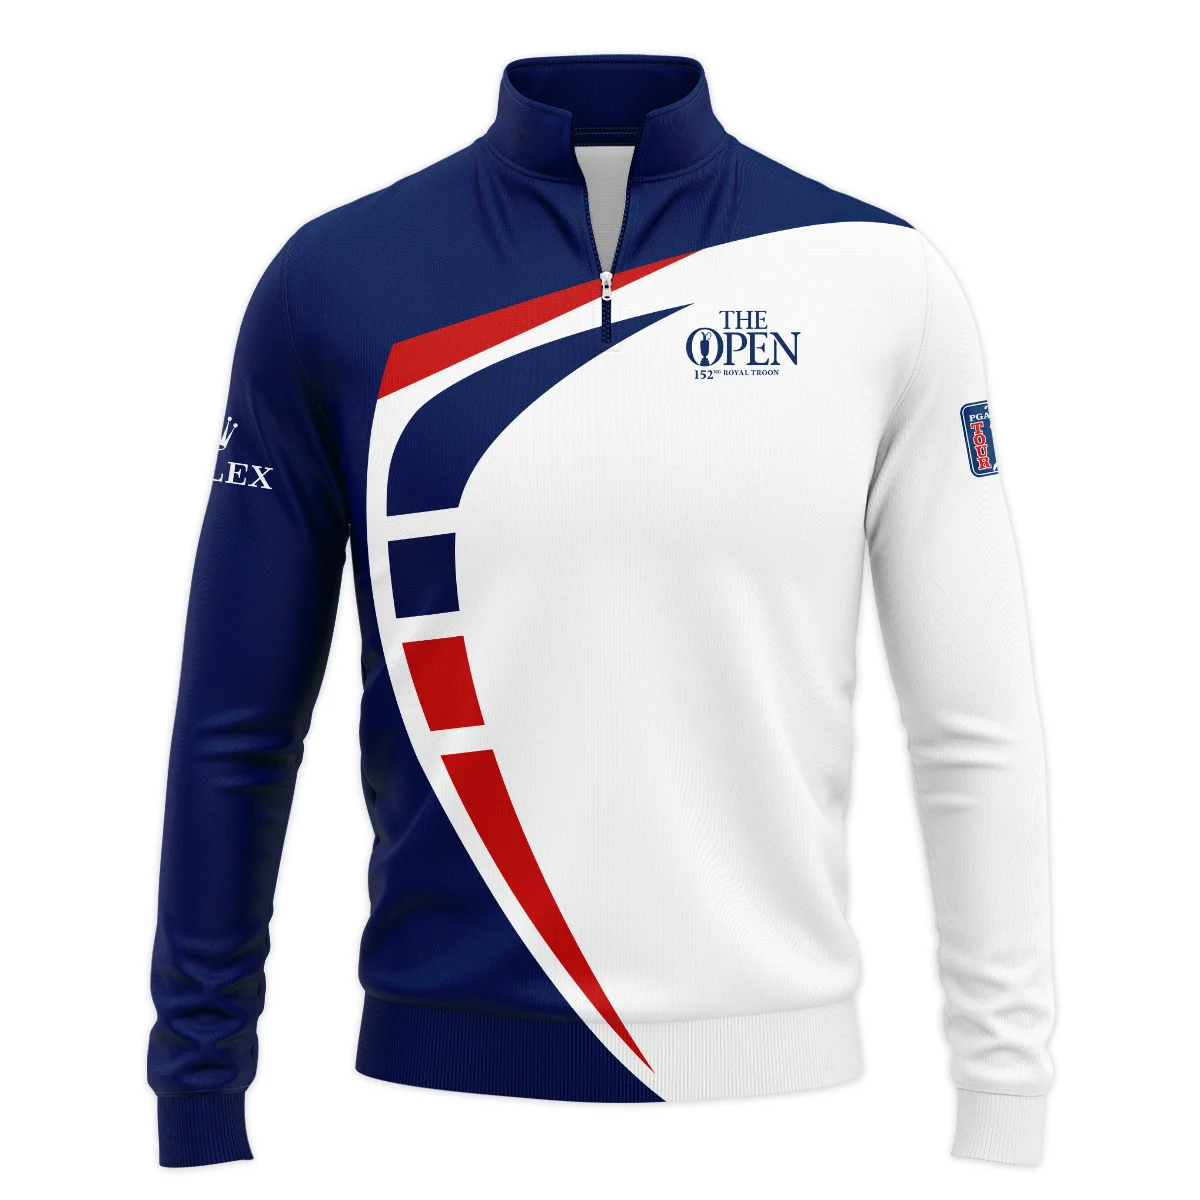 152nd Open Championship Rolex White Blue Red Pattern Background Quarter-Zip Jacket All Over Prints HOTOP270624A03ROXSWZ